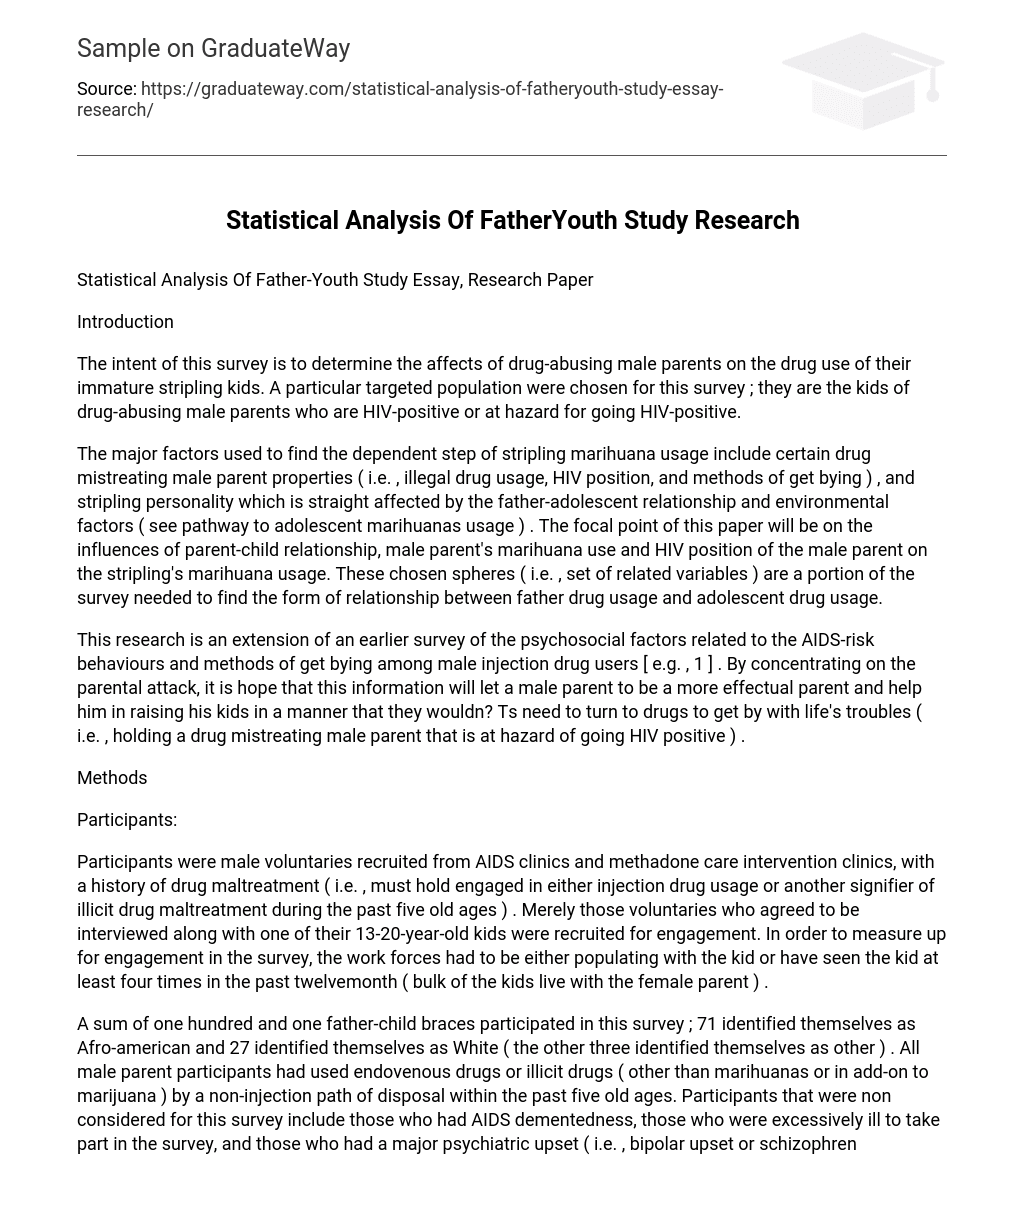 Statistical Analysis Of FatherYouth Study Research